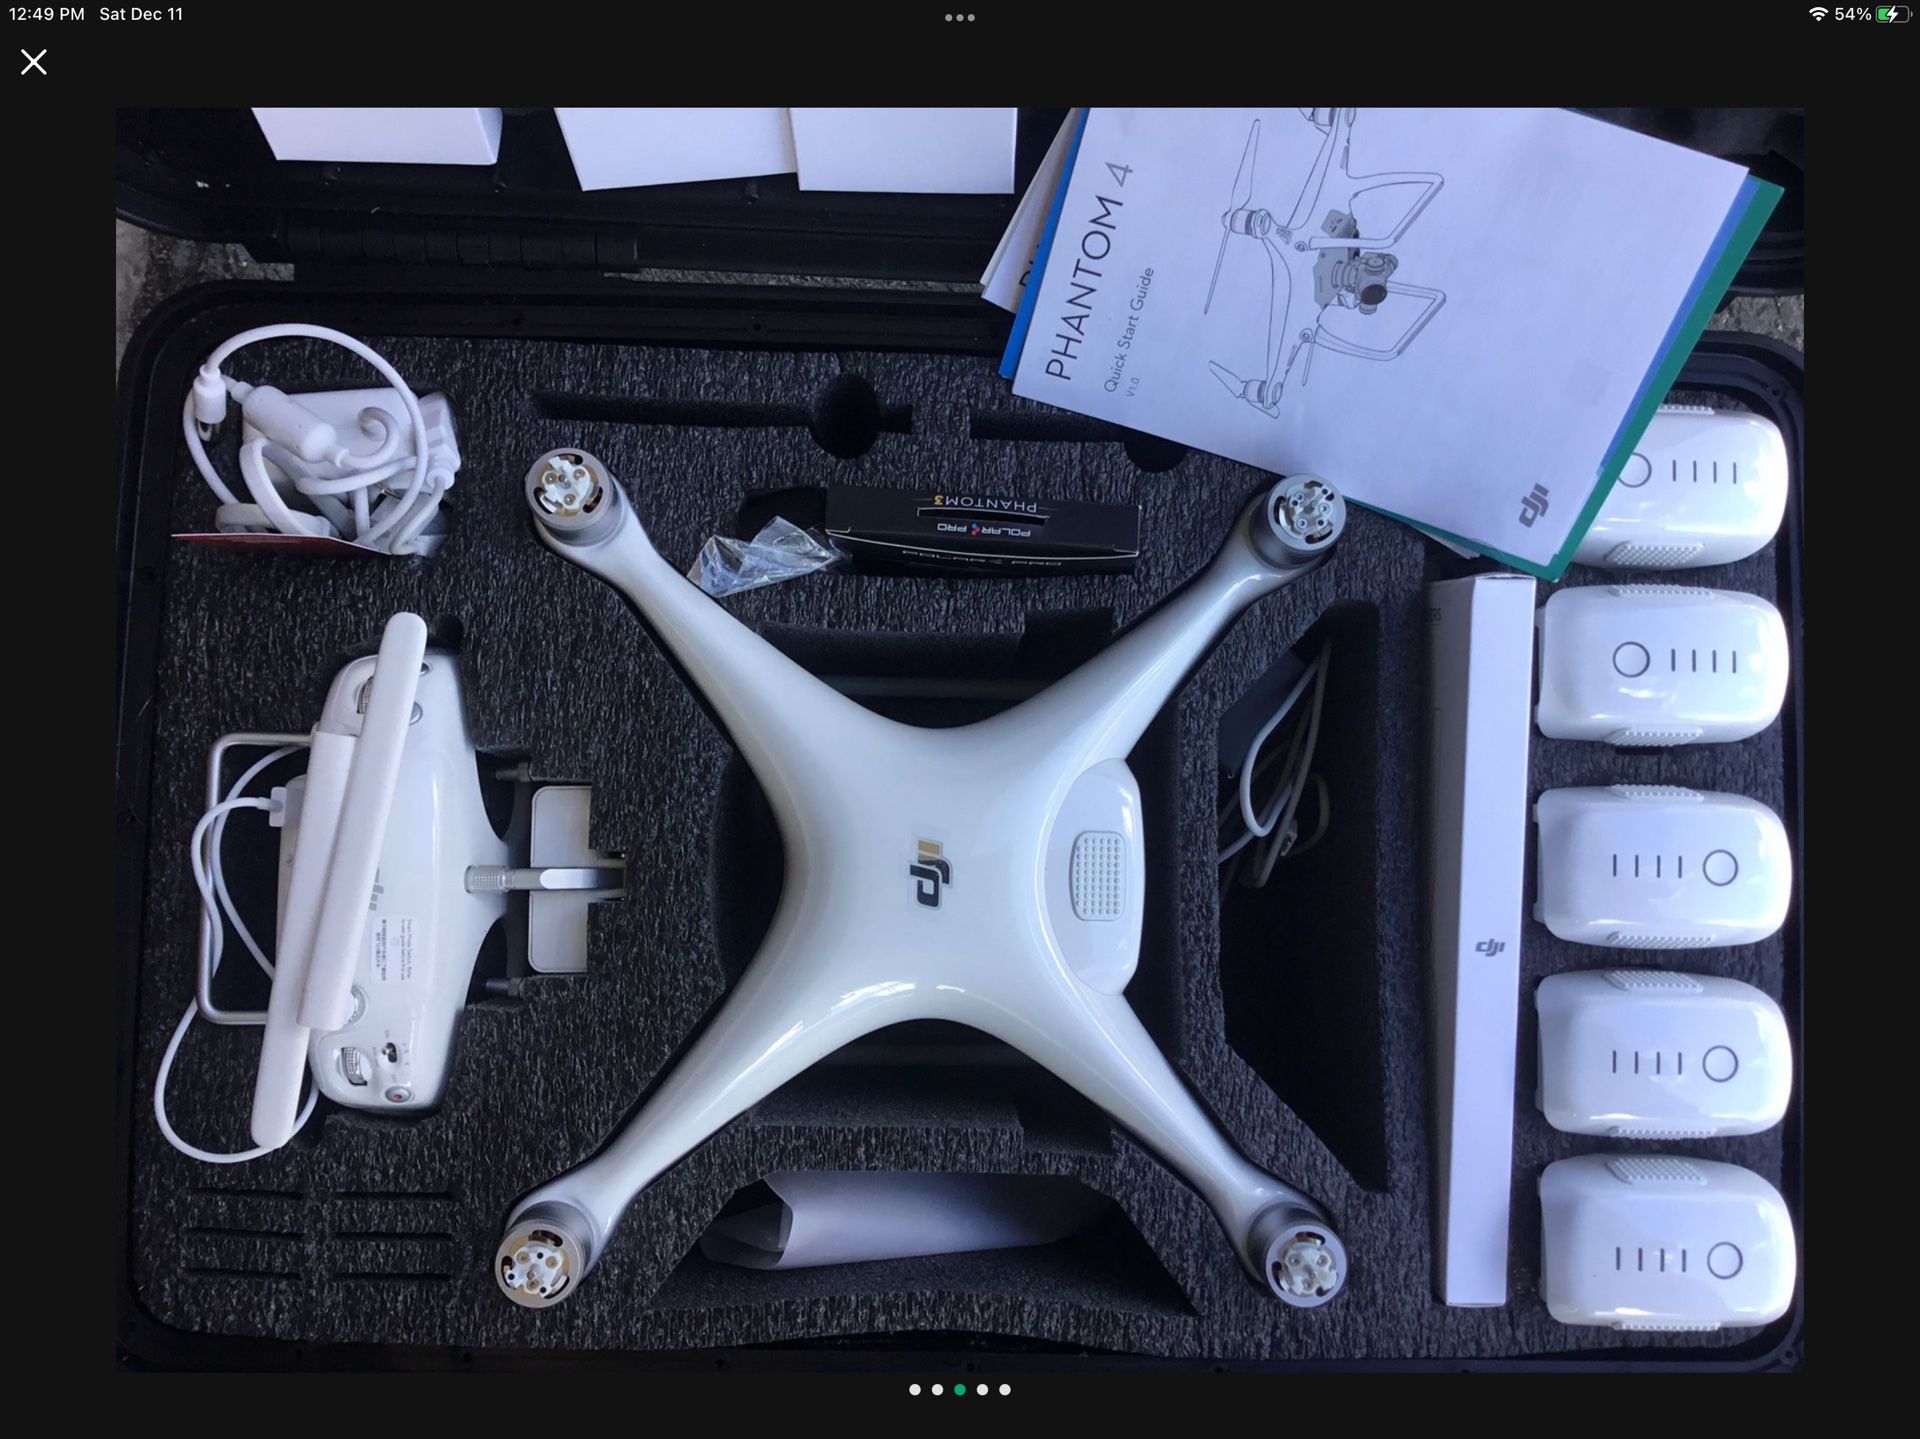  DJI Phantom 4 DRONE Professional Quadcopter with Camera and 3-Axis Gimbal - White $700 Cash Only